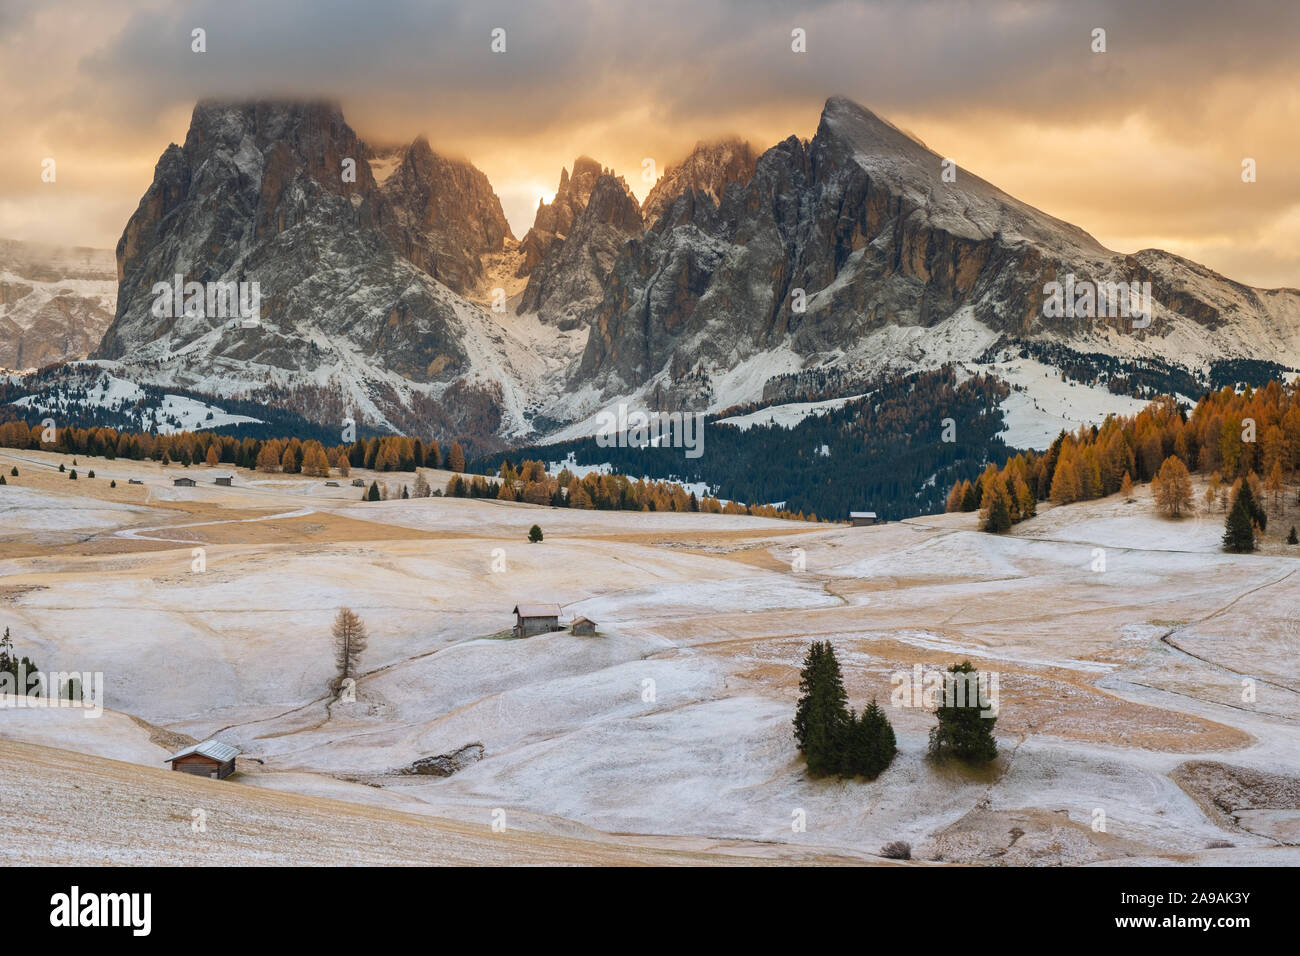 Beautiful autumn scenery in Alpe di Siusi or Seiser Alm with Sassolungo - Langkofel mountain group in background in Dolomite Alps, South Tyrol, Italy. Stock Photo